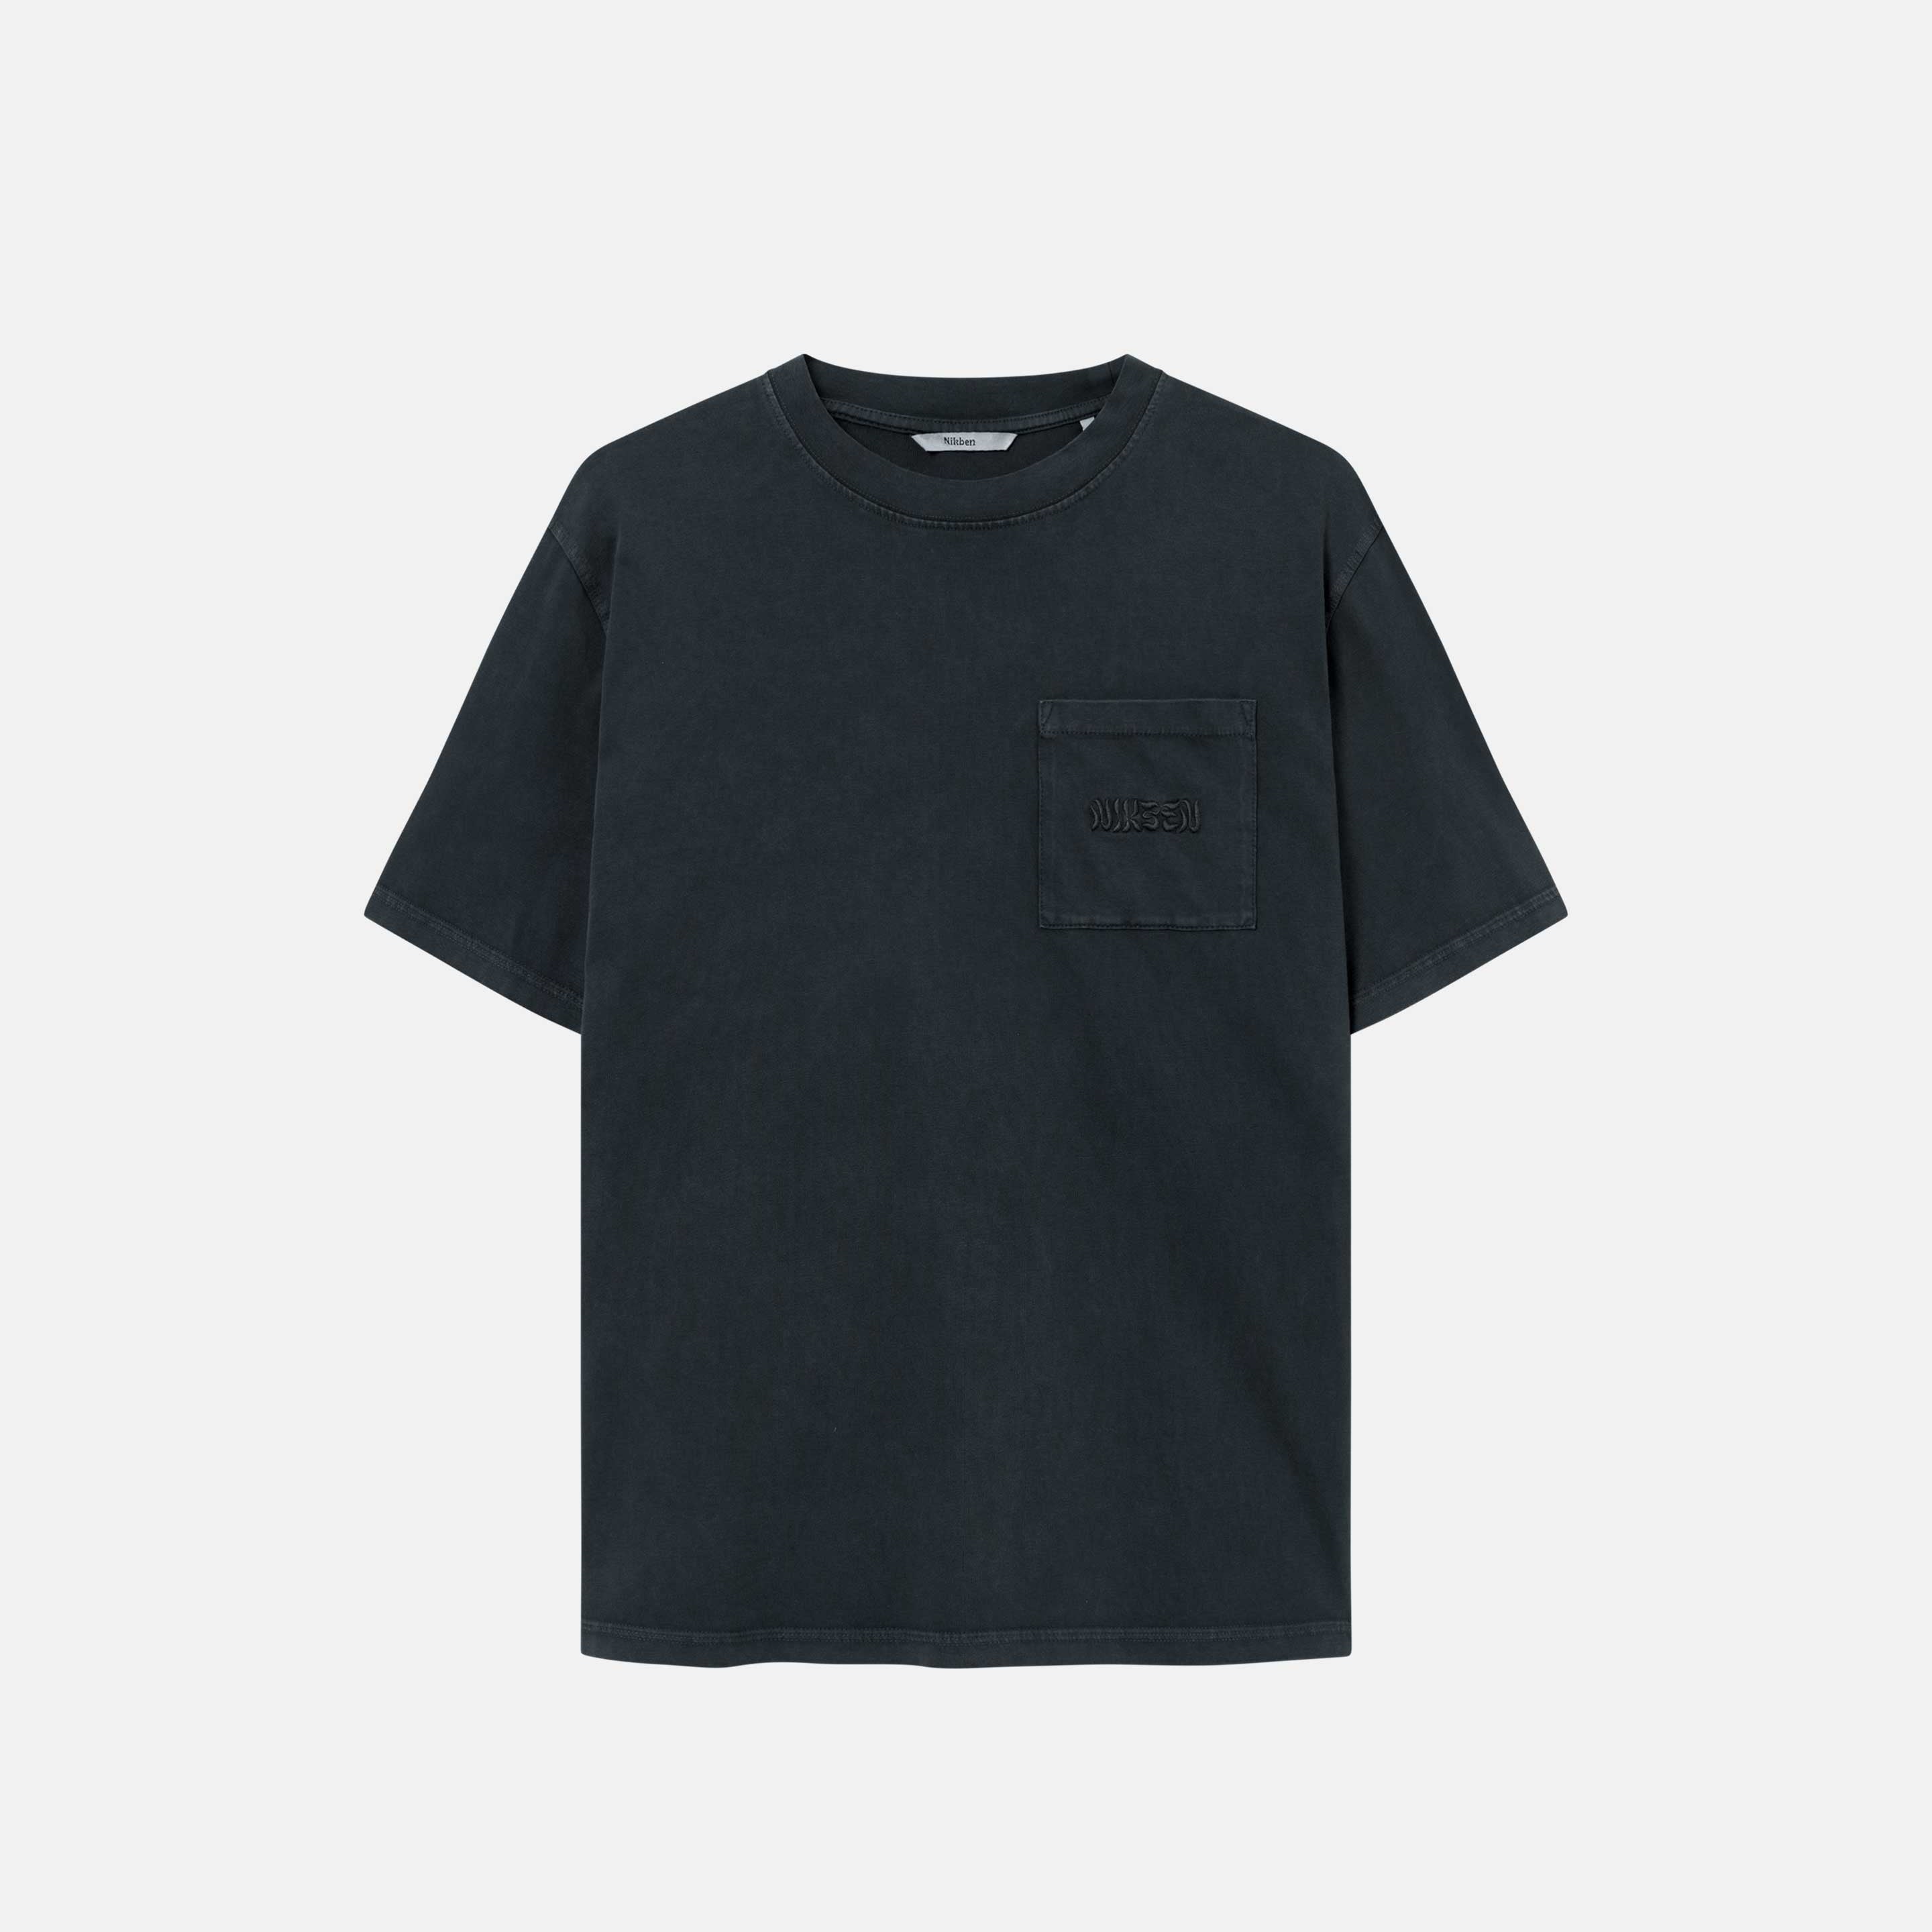 Washed black t-shirt with breast pocket and embroidered logo.